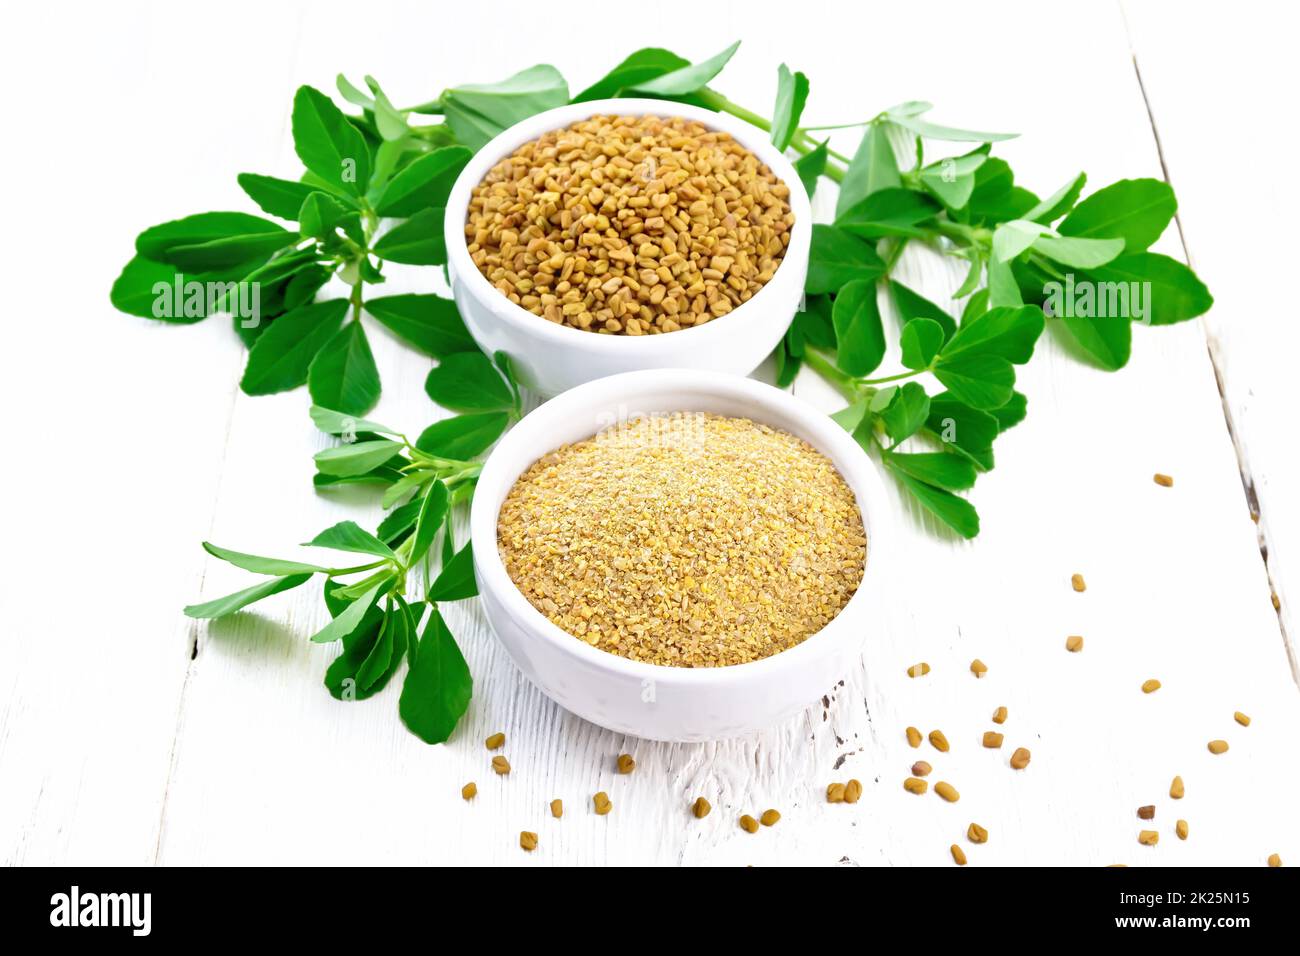 Fenugreek in two bowls with leaves on light board Stock Photo